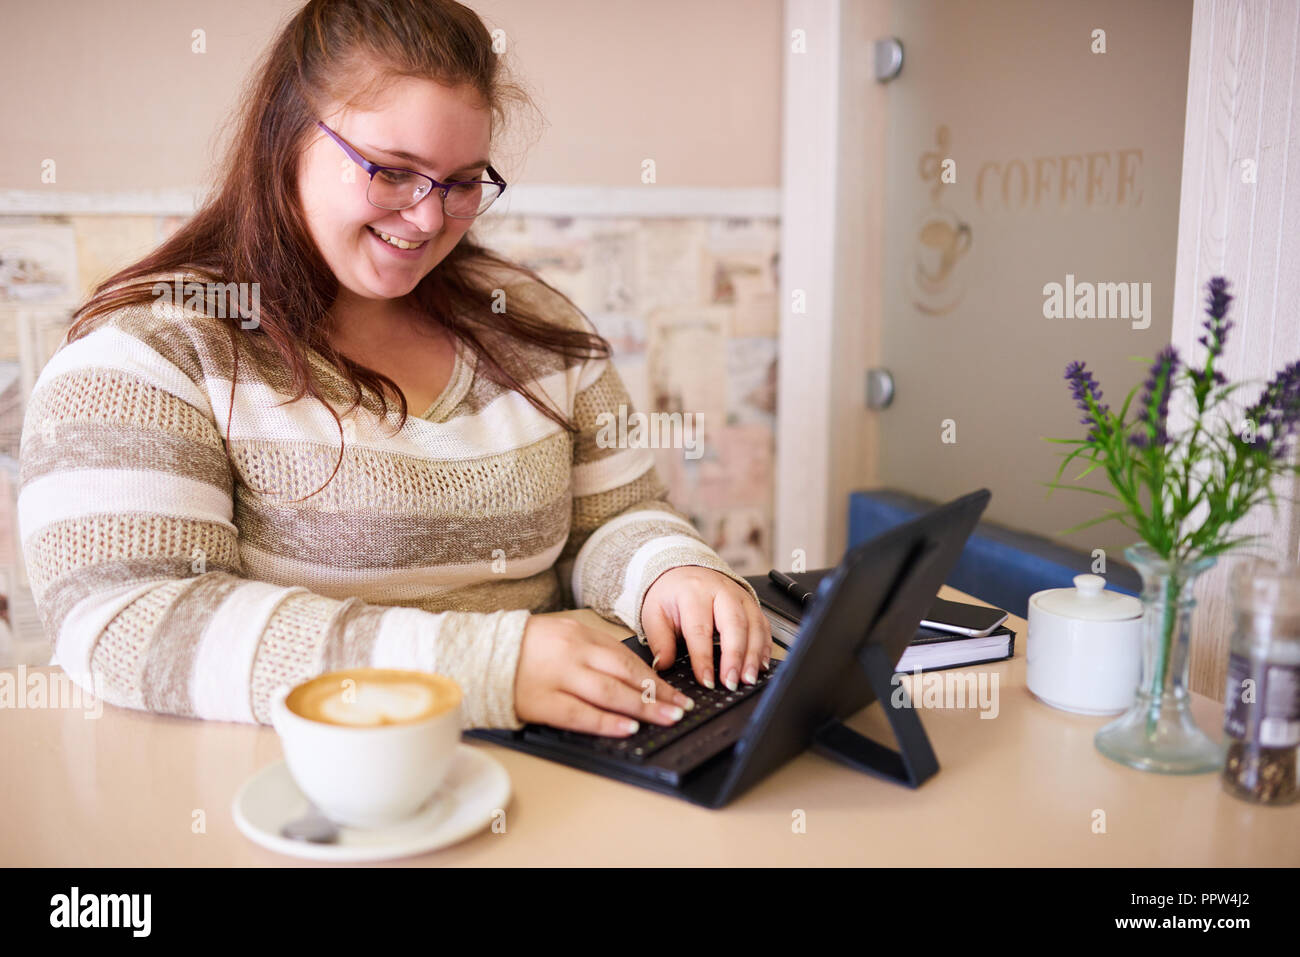 Plus size caucsian woman happily smiling while working on her tablet and keyboard in a bright cafe with a morning cup of coffee to be more productive. Stock Photo